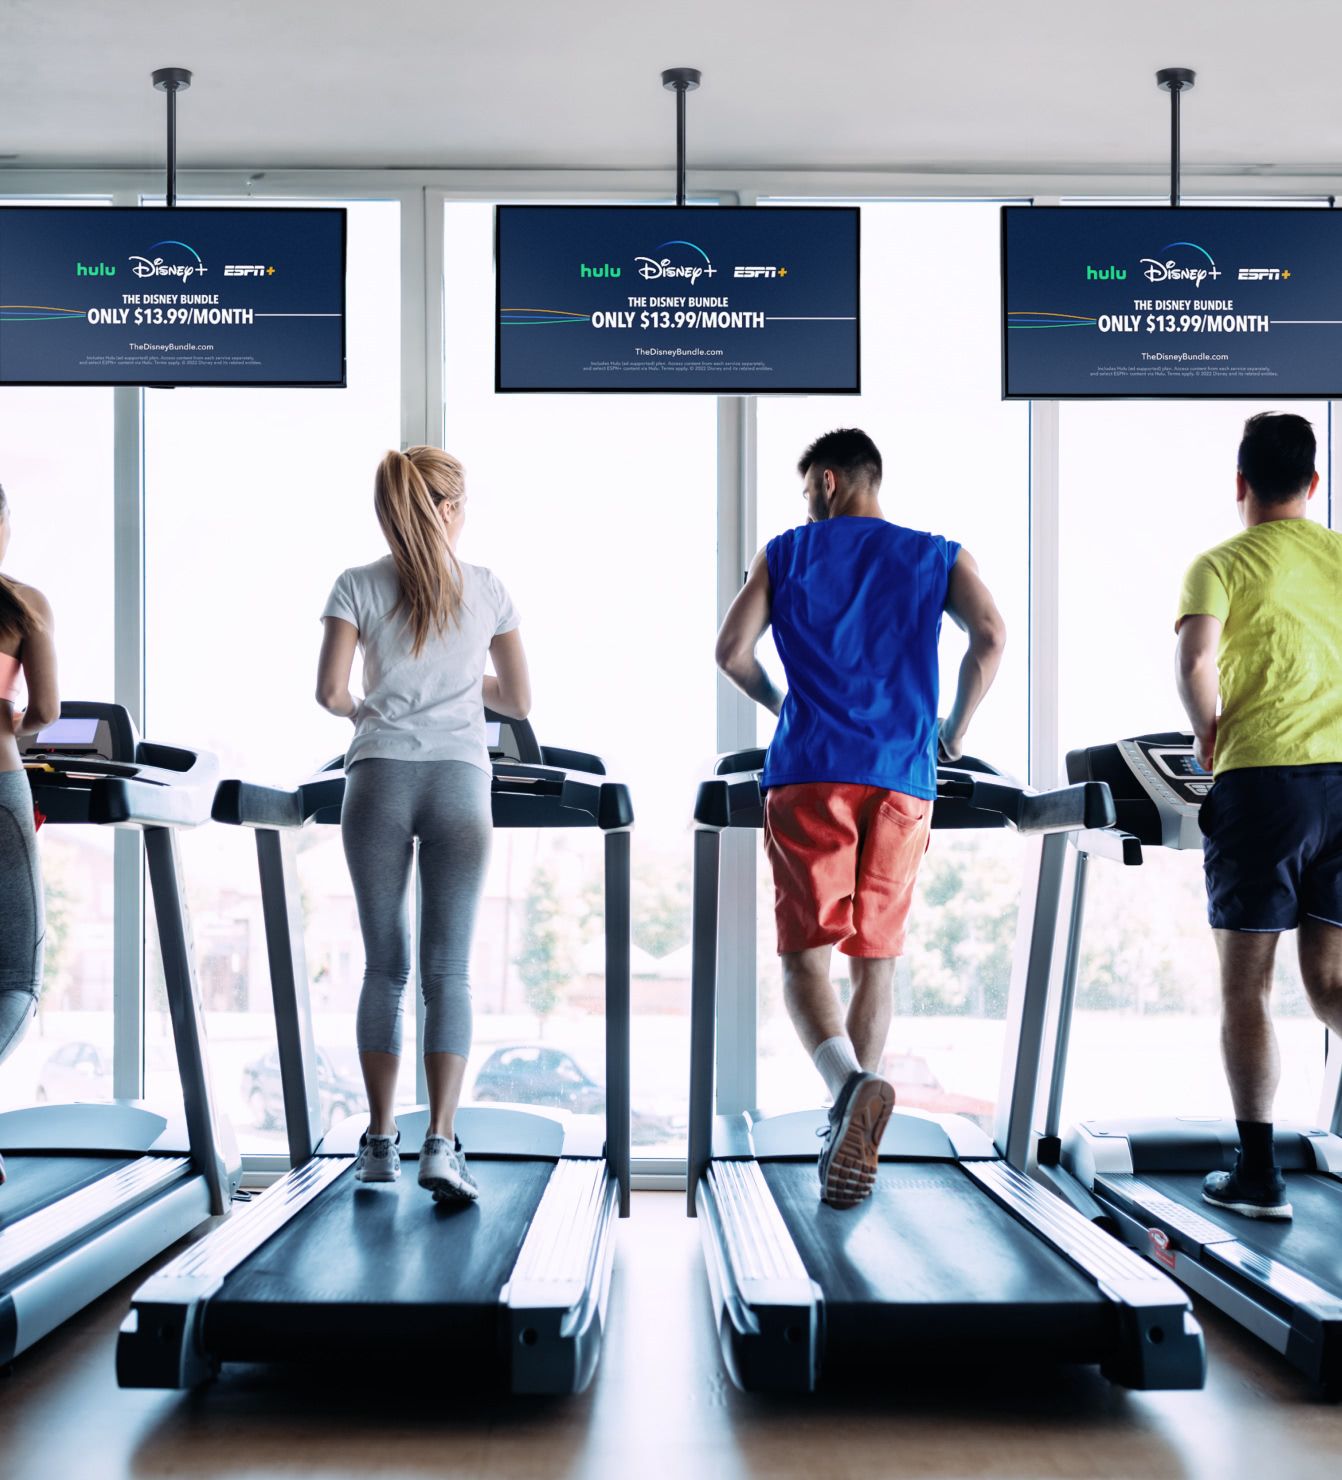 Gym members running on treadmills while TV screens with Rockbot advertising play in front of them.